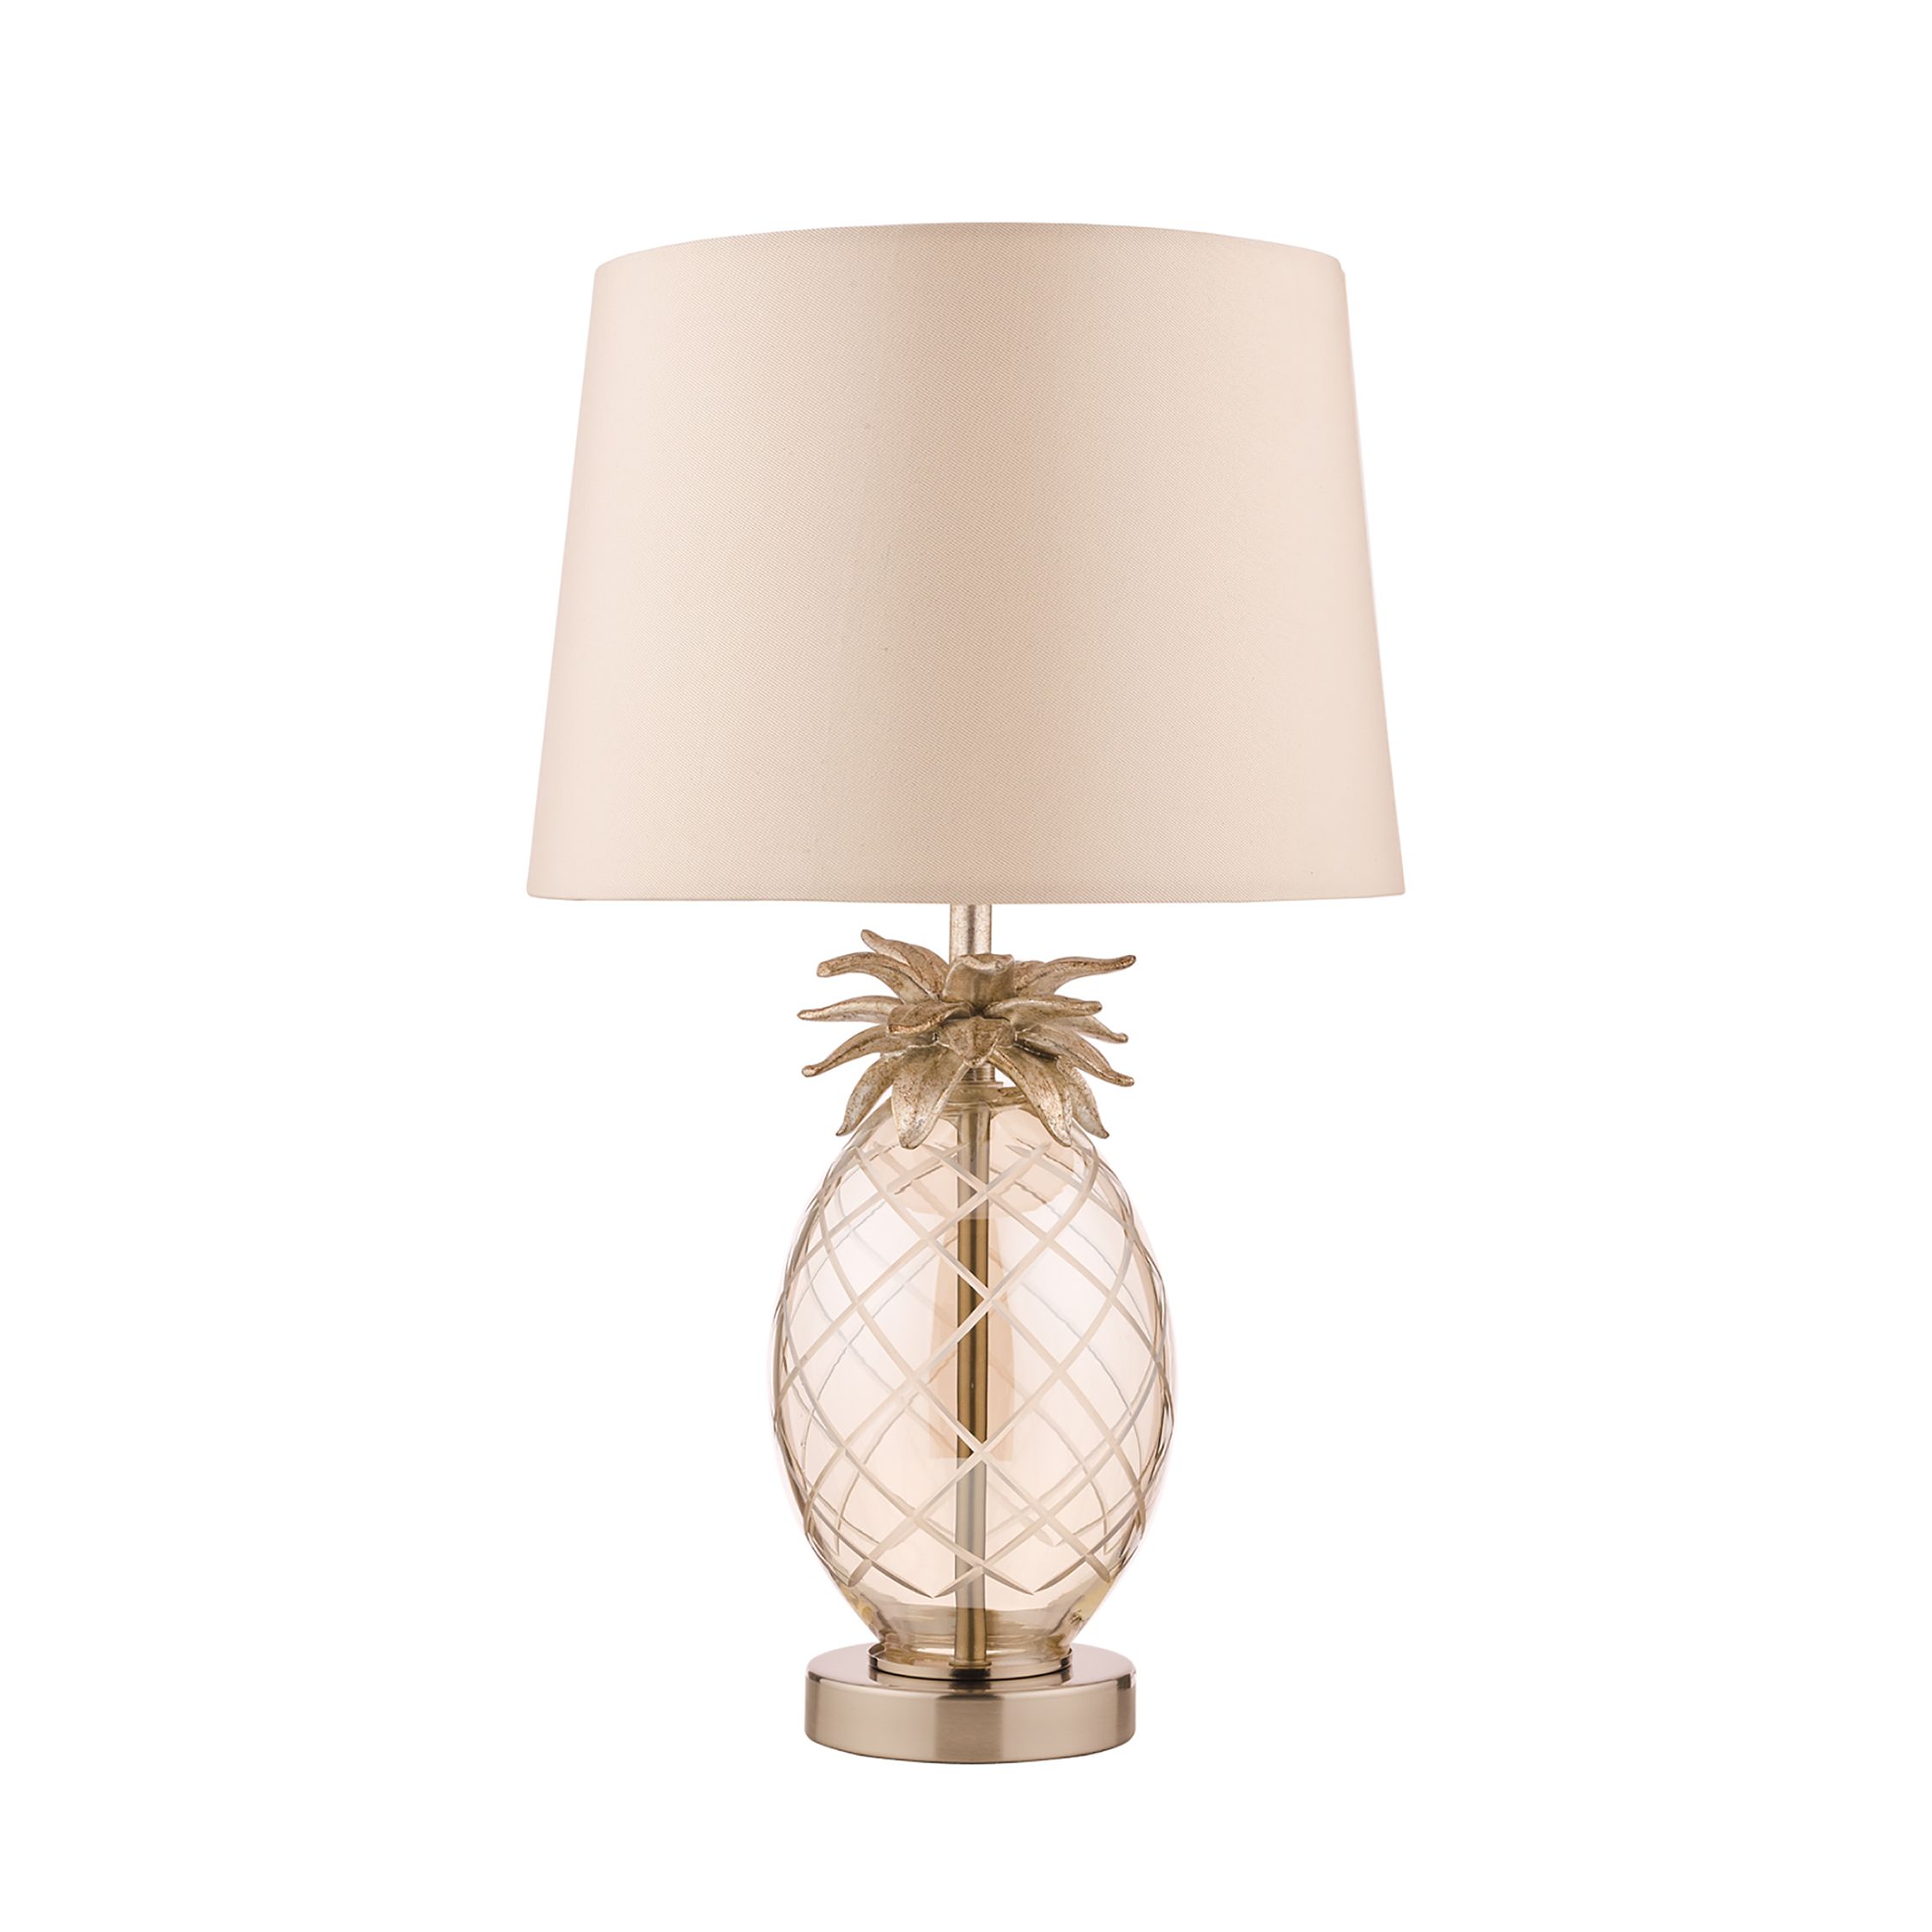 Photo of Laura ashley pineapple glass petite table lamp champagne